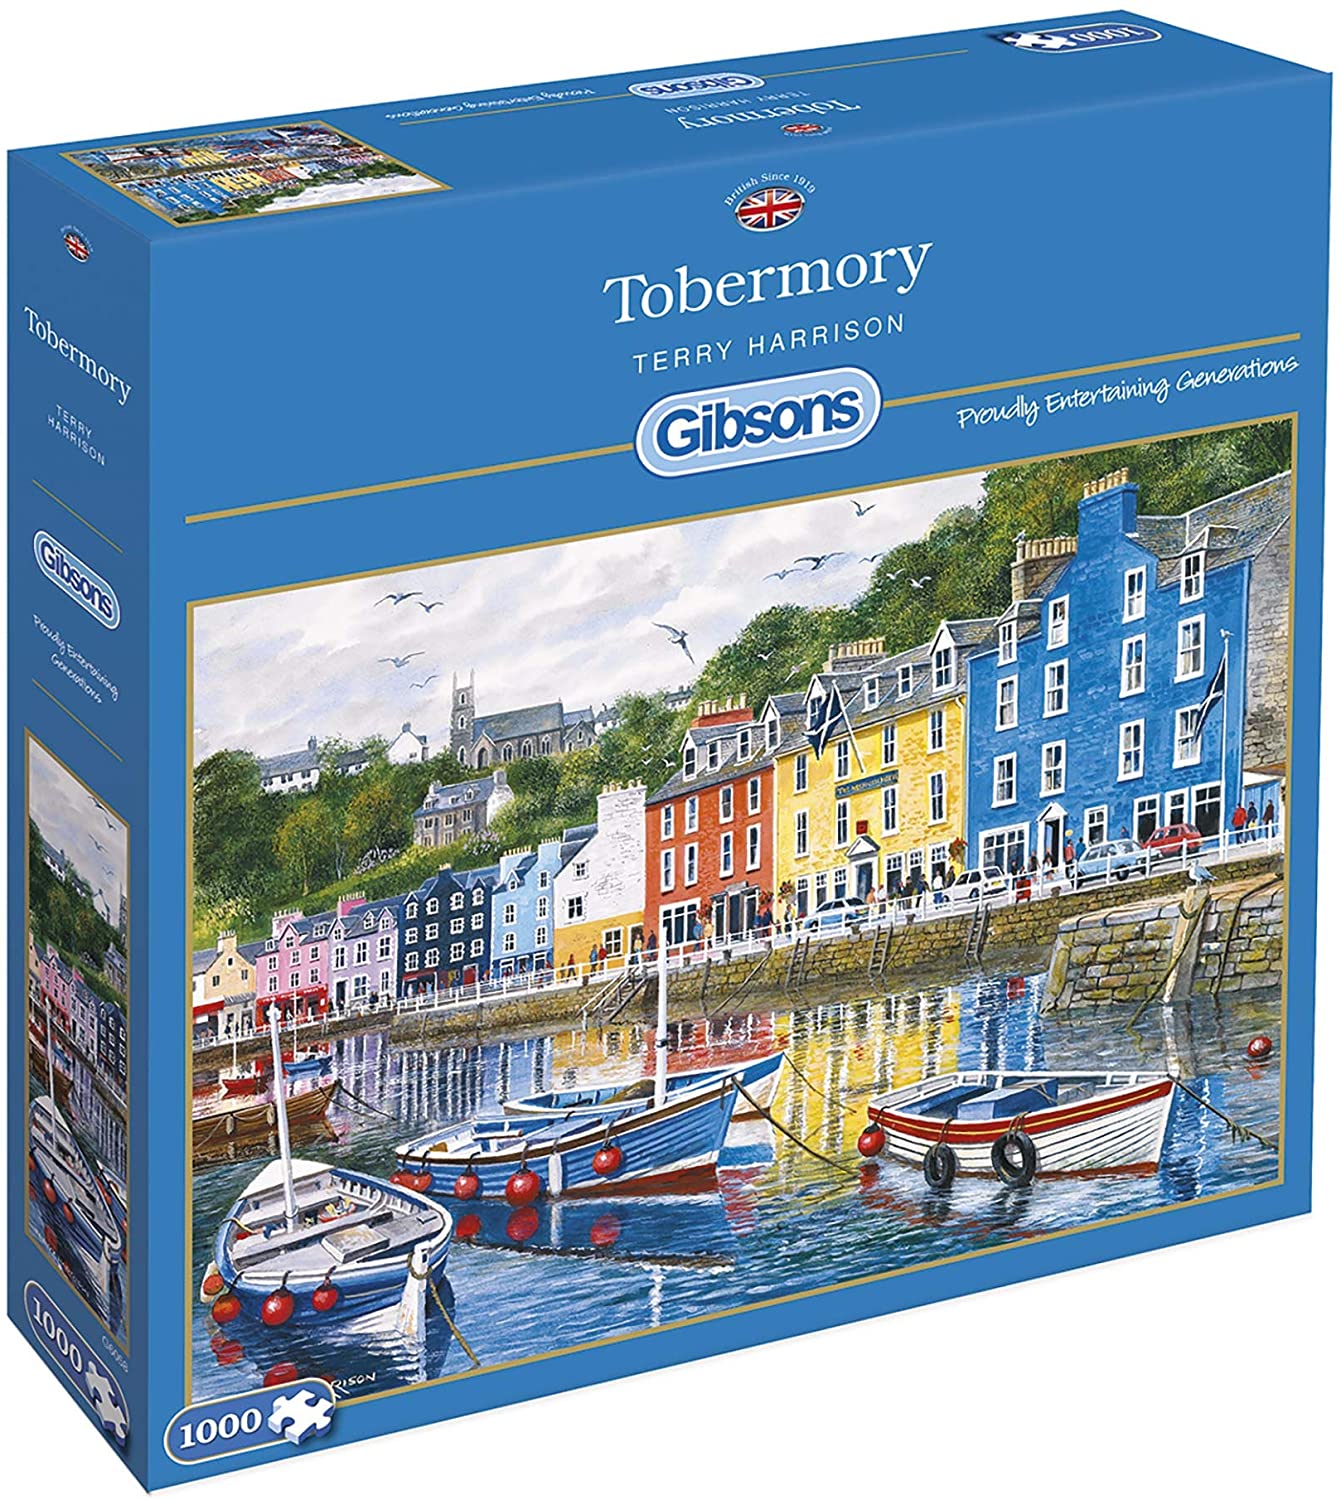 Tobermory - Gibsons - Terry Harrison - 1000 pce